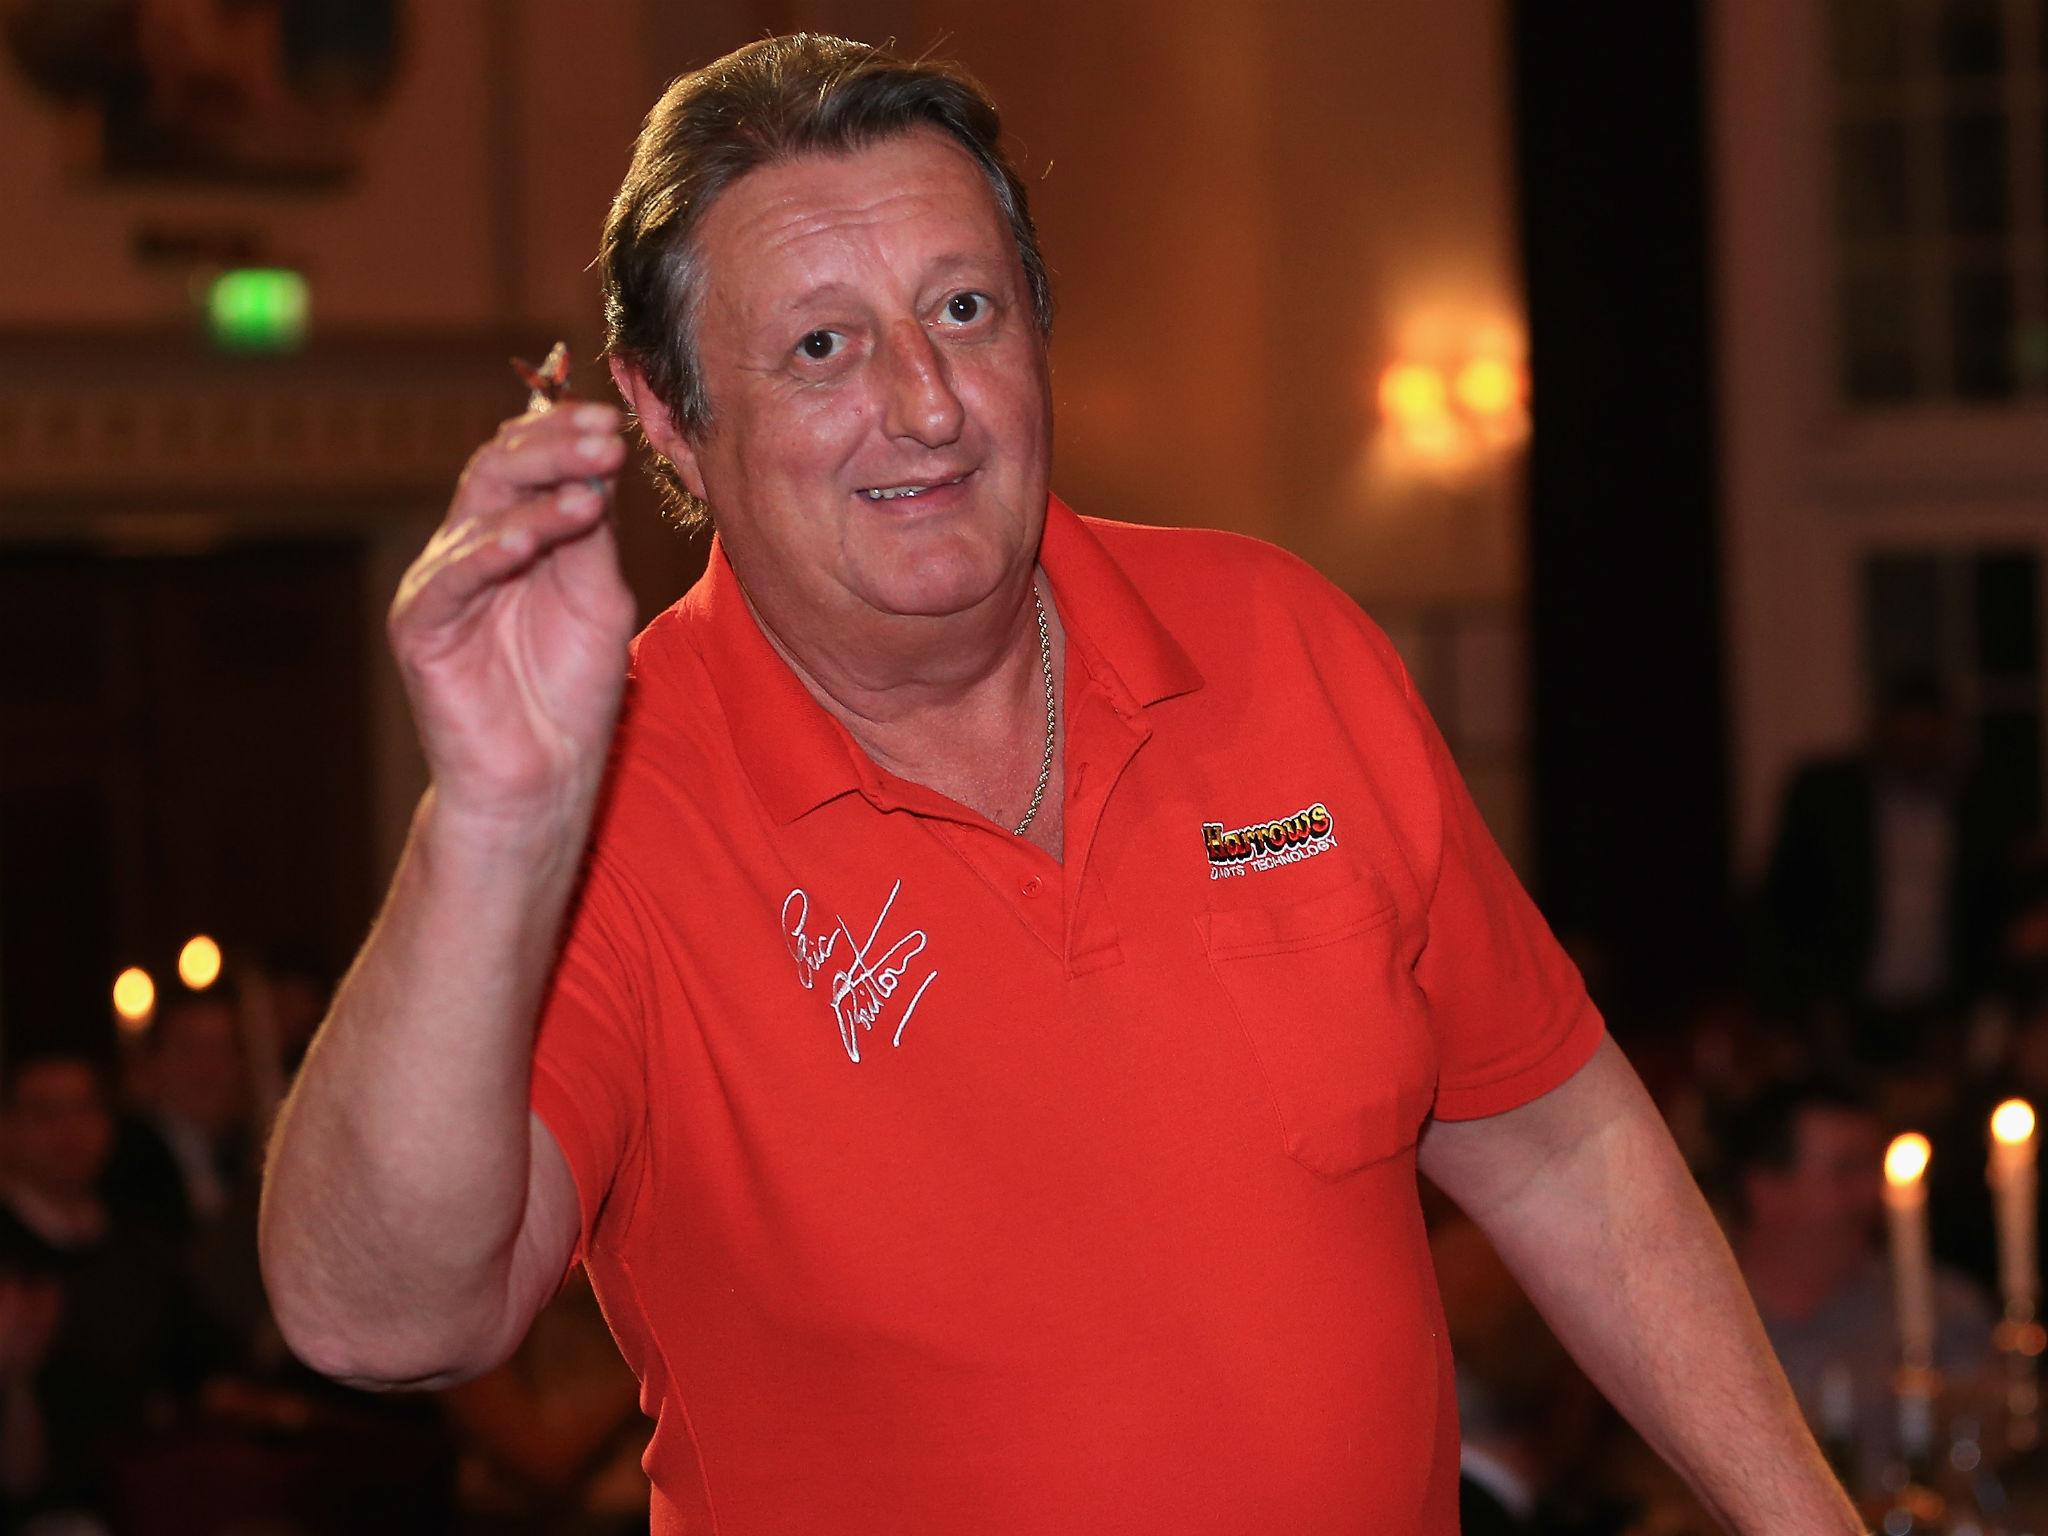 The much-loved darts player became a pundit on Sky Sports and in 2012 finished fourth in ‘I’m A Celebrity...’